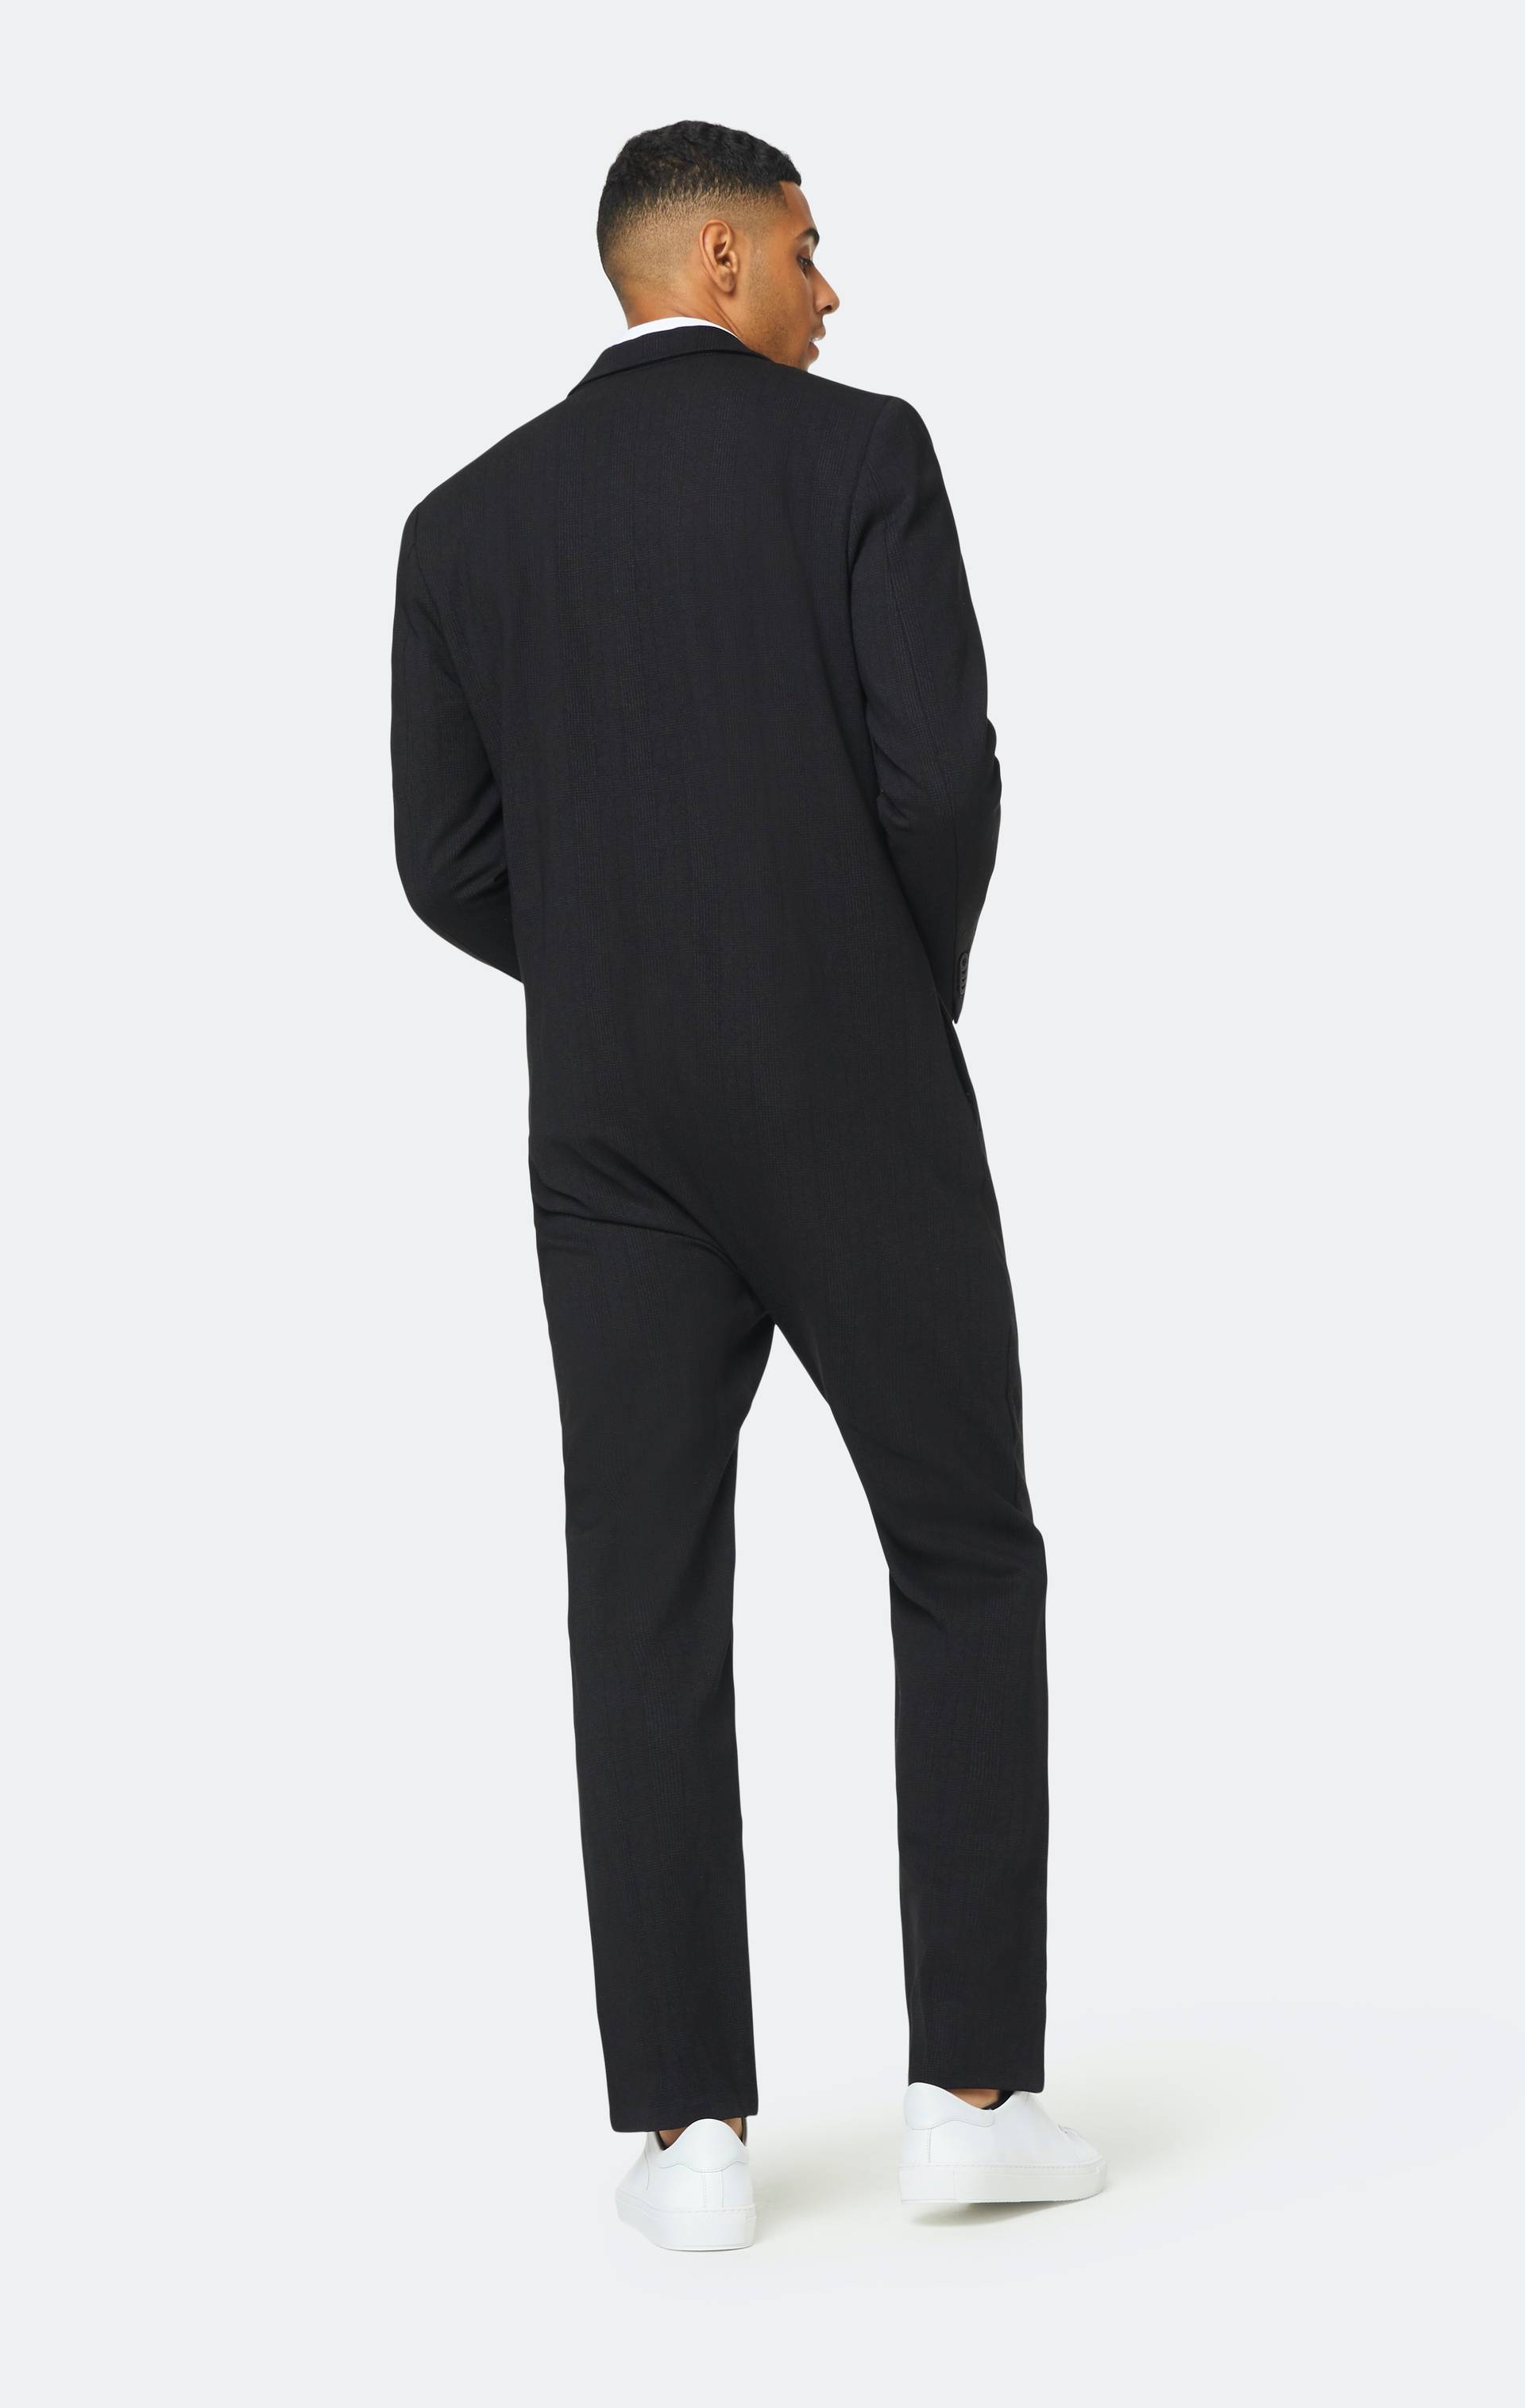 Onepiece The Suit Black - 3